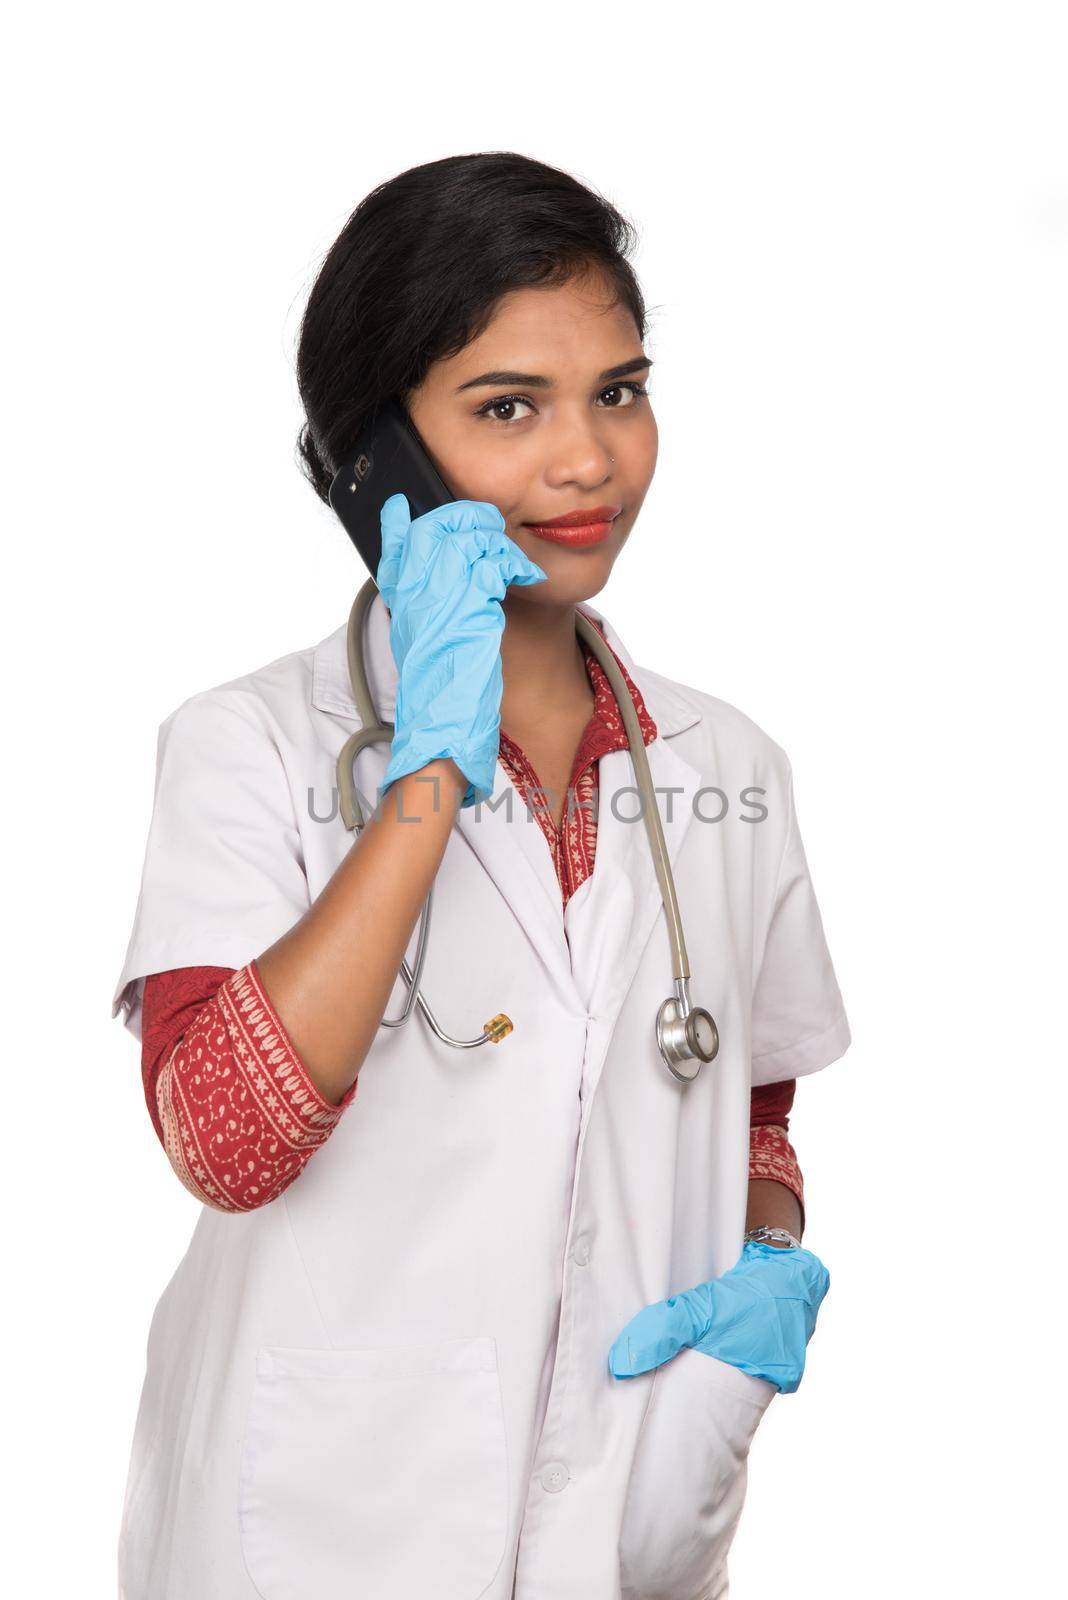 Female doctor with stethoscope talking on mobile phone on white background by DipakShelare